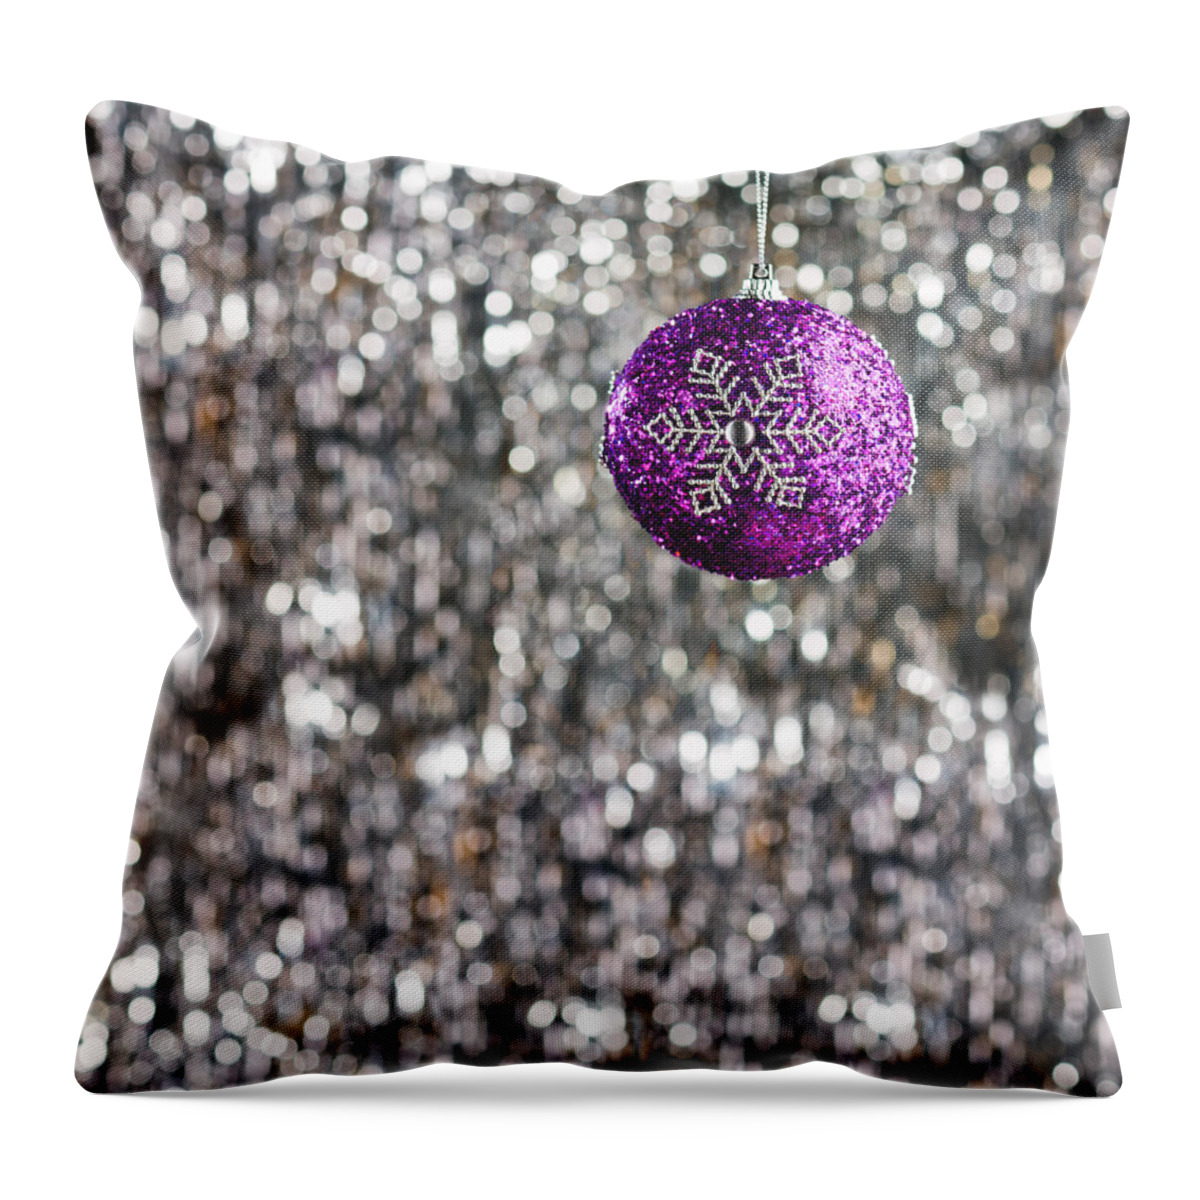 Advent Throw Pillow featuring the photograph Purple Christmas Bauble by U Schade